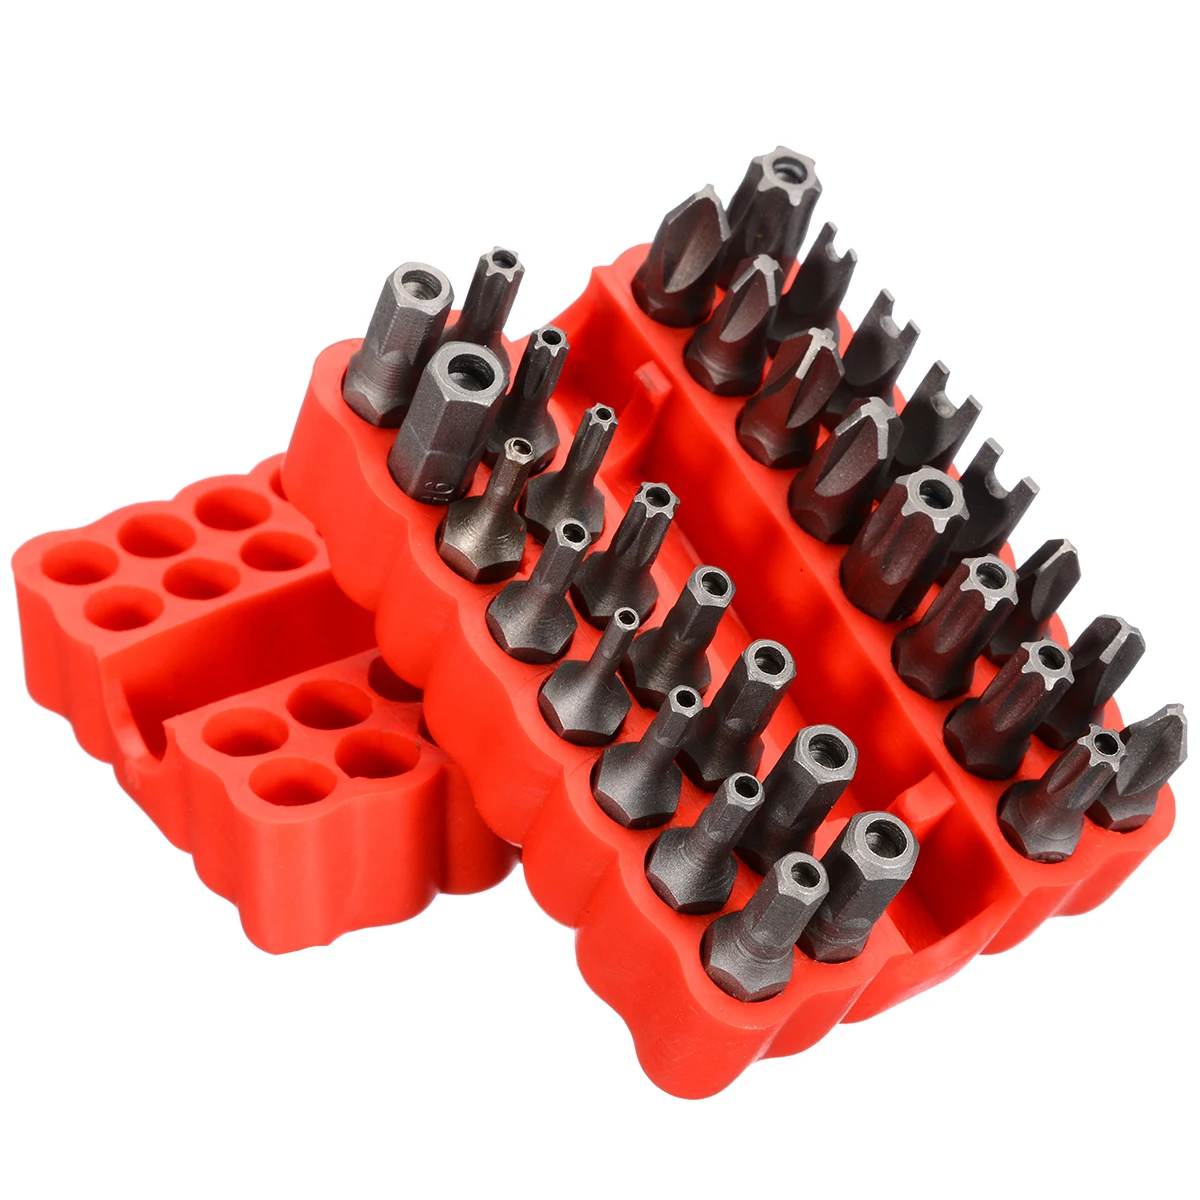 33pcs Security Tamper Proof Torx Hex Screw Driver Bits Set Magnetic Screwdriver Bits with Magnetic Holder for Hand Tools